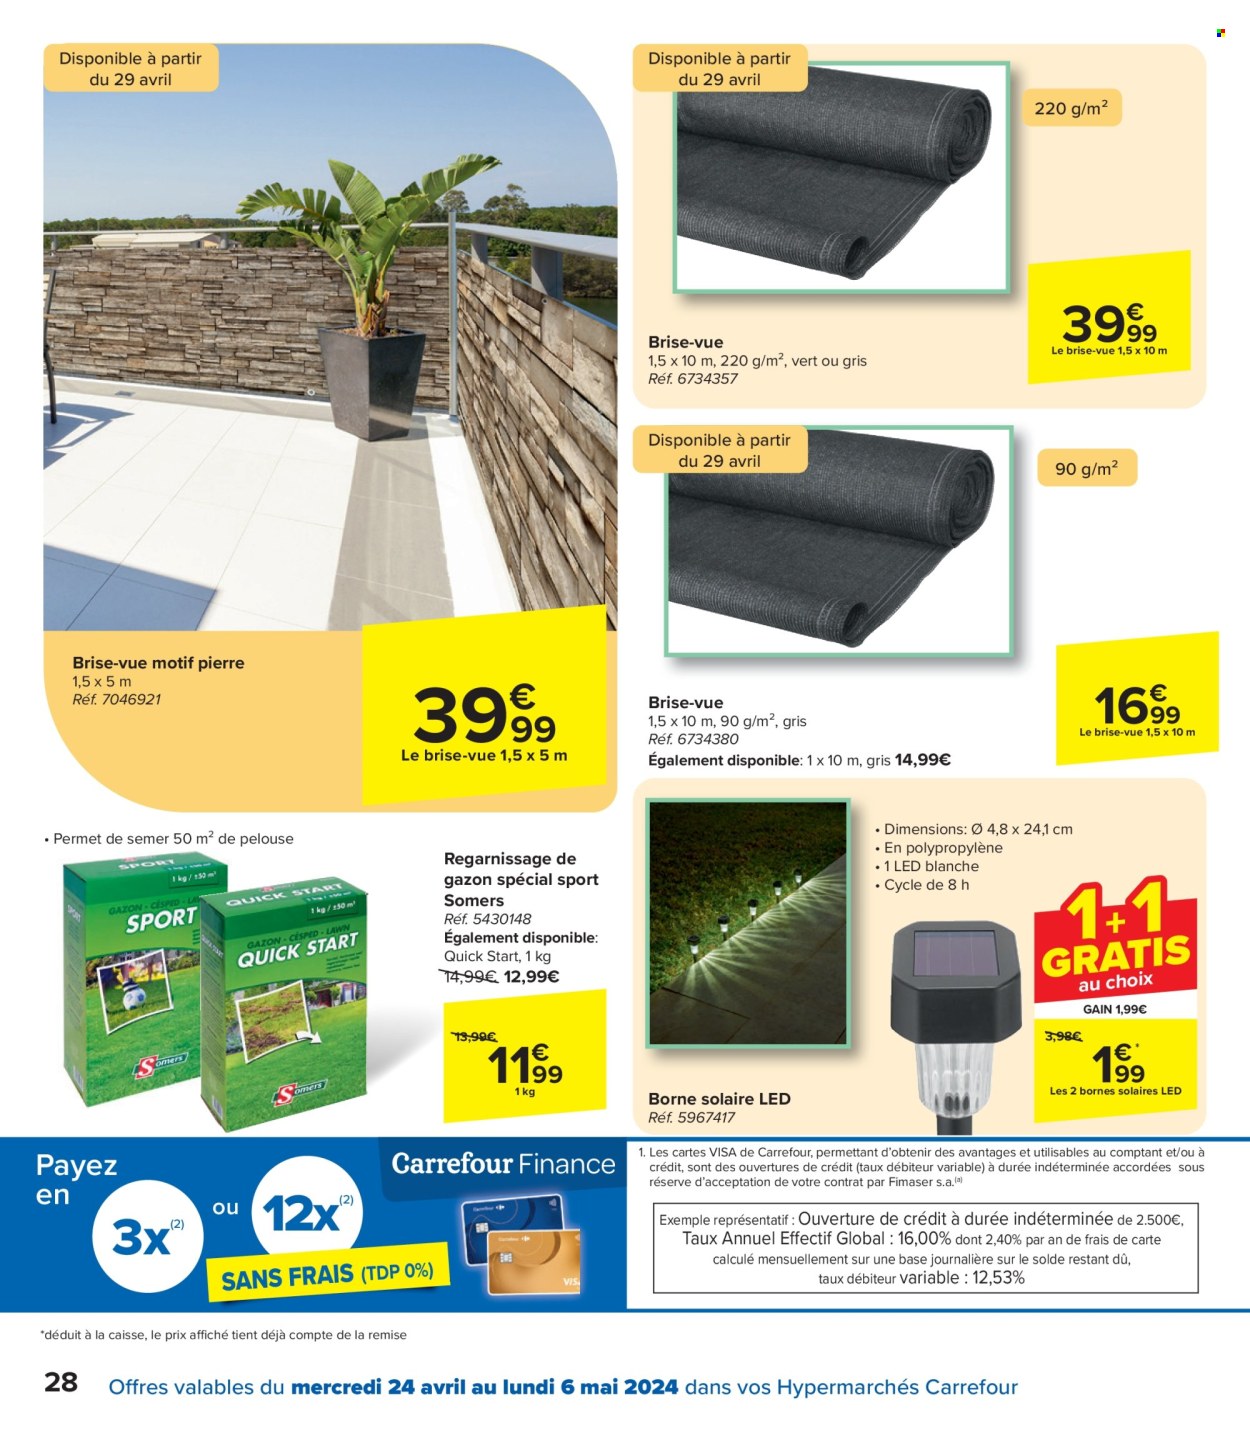 Catalogue Carrefour hypermarkt - 24.4.2024 - 6.5.2024. Page 28.